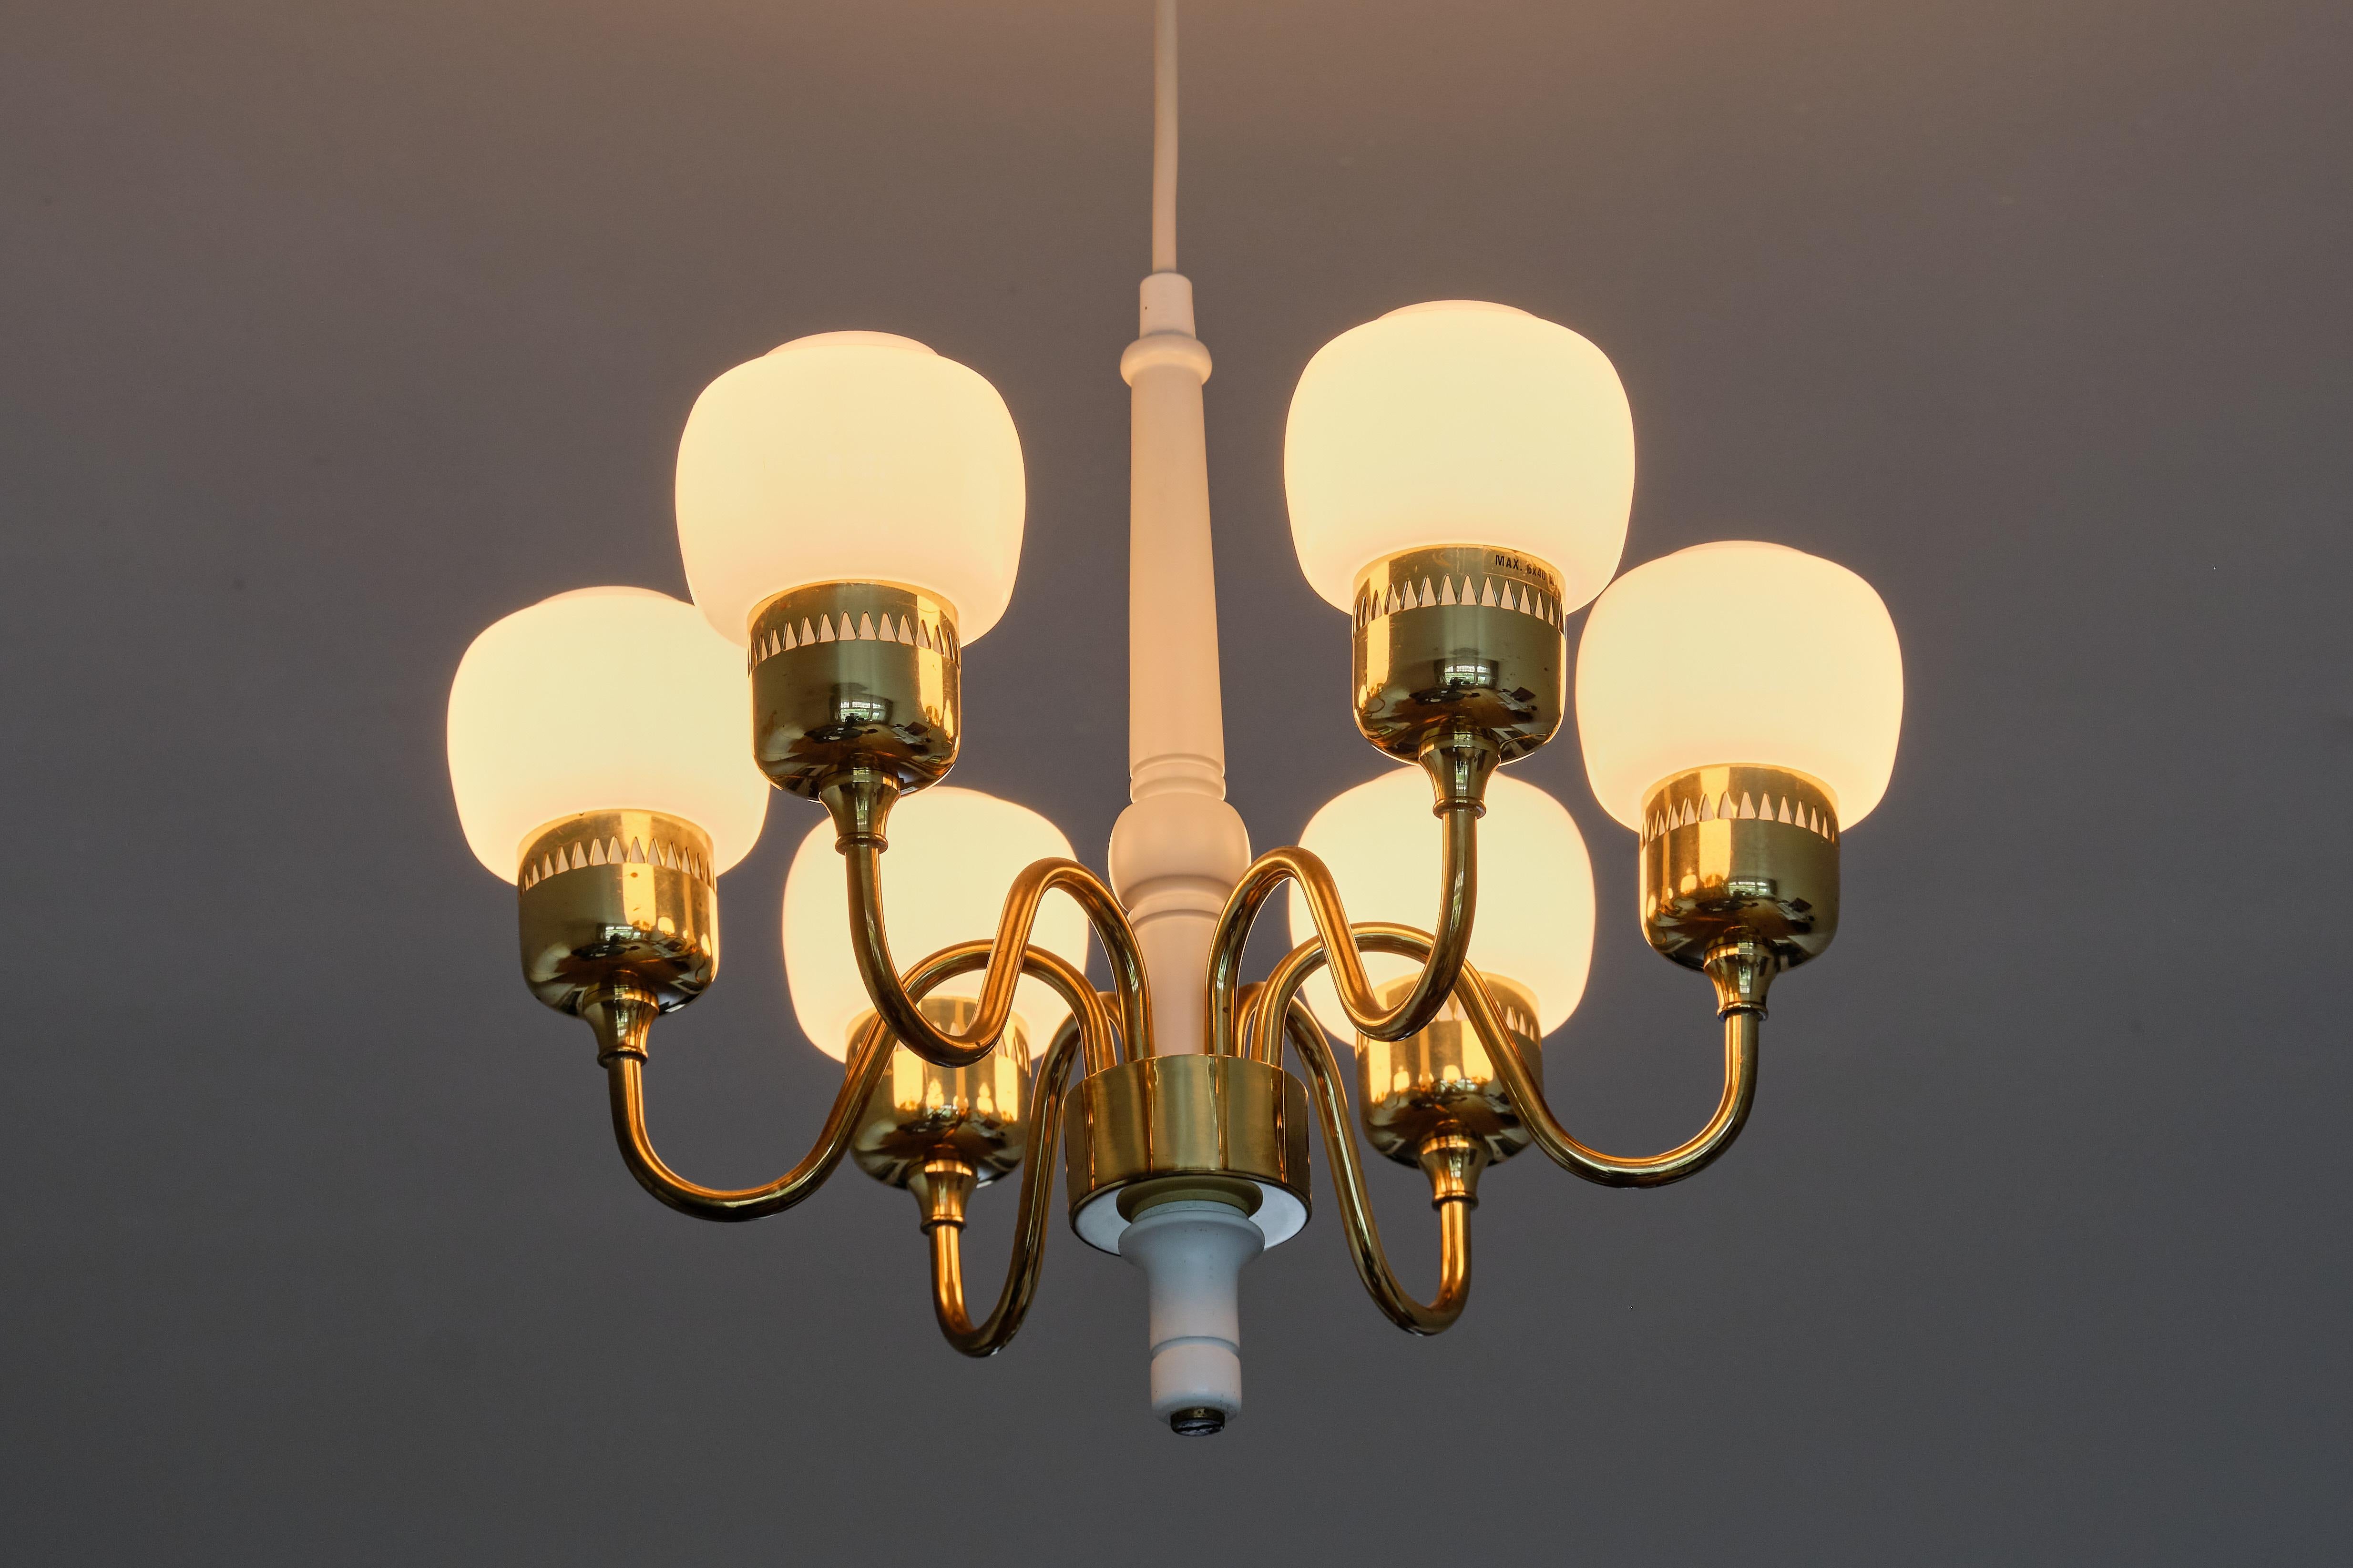 Hans-Agne Jakobsson Six Arm T526 Chandelier, Brass and Opal Glass, Sweden, 1960s For Sale 1